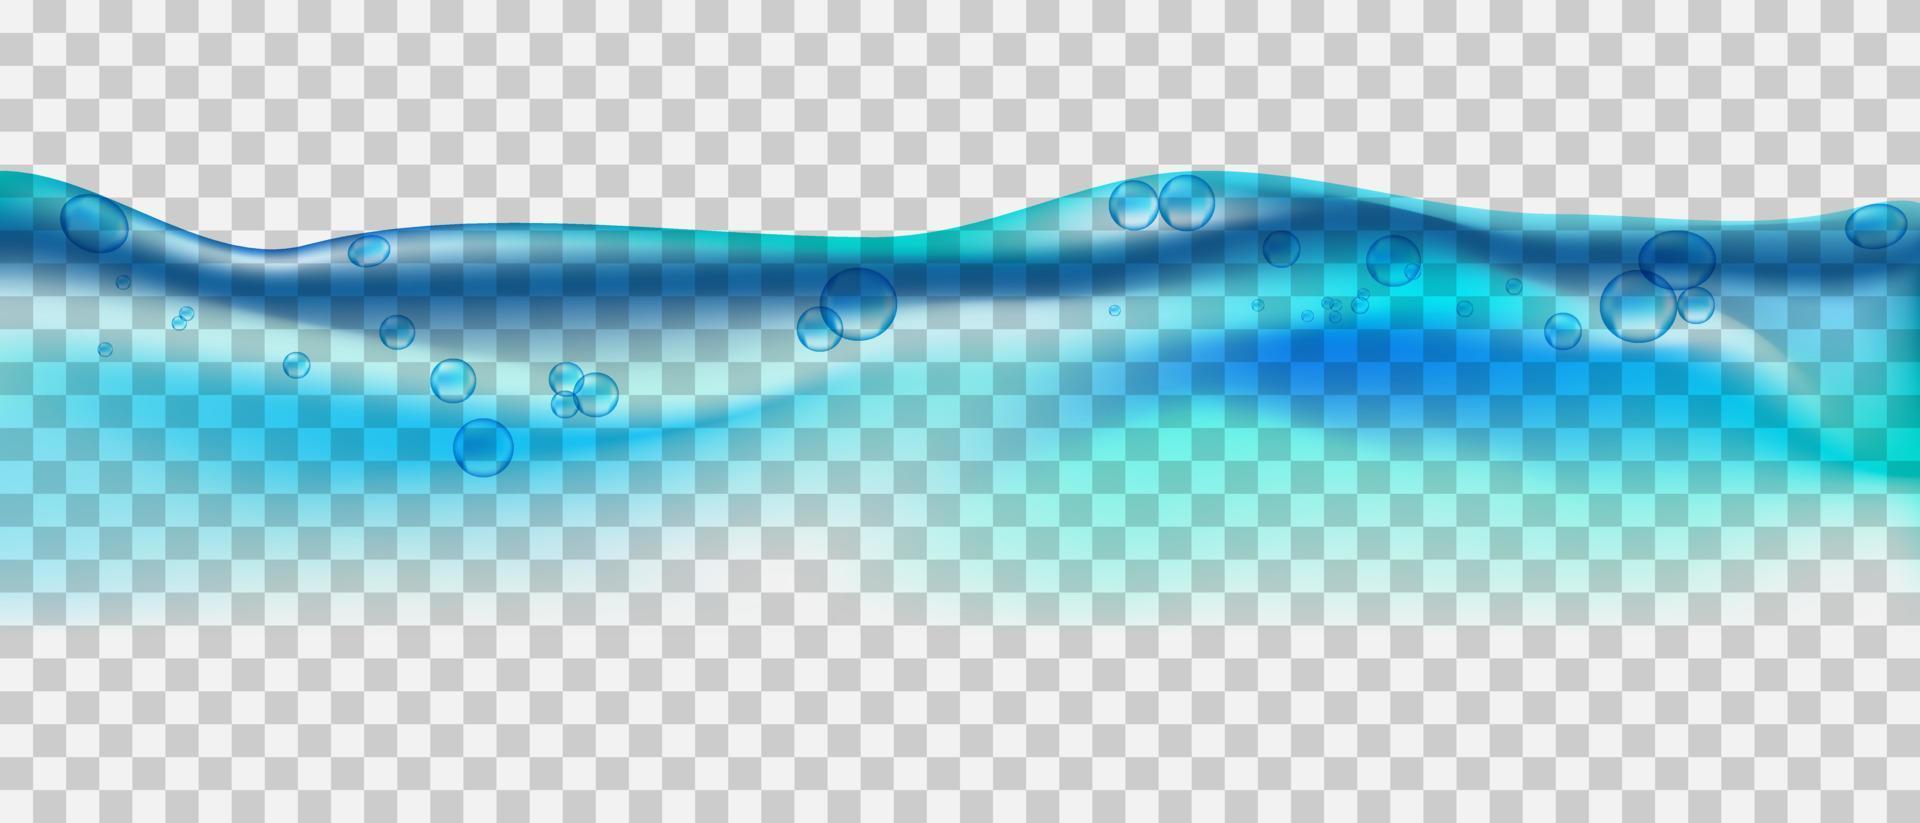 Water splash with air bubbles vector